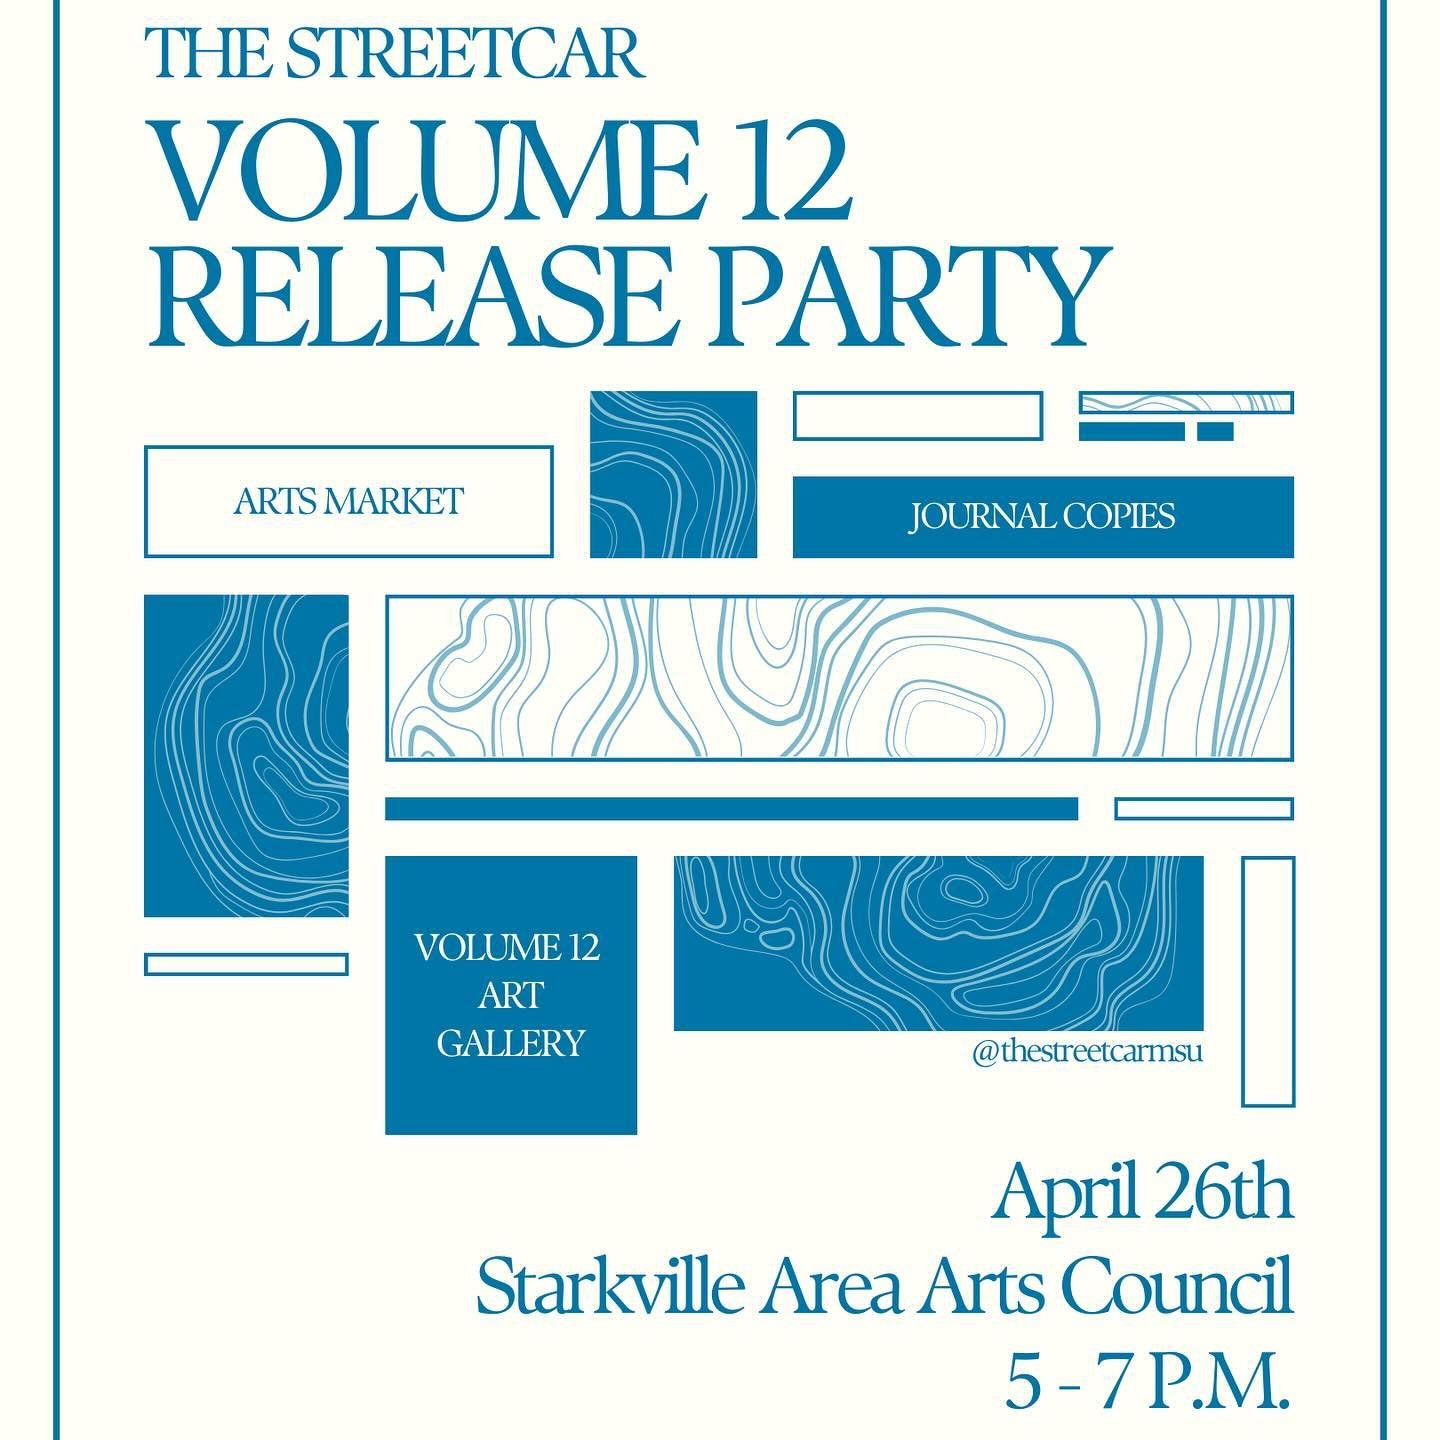 We are absolutely THRILLED to announce our Volume 12 Release Party! So much time and energy has gone into this edition, and we think you are going to love it as much as we do. Come out to @starkvillearts on Friday, April 26th to grab a journal copy, 